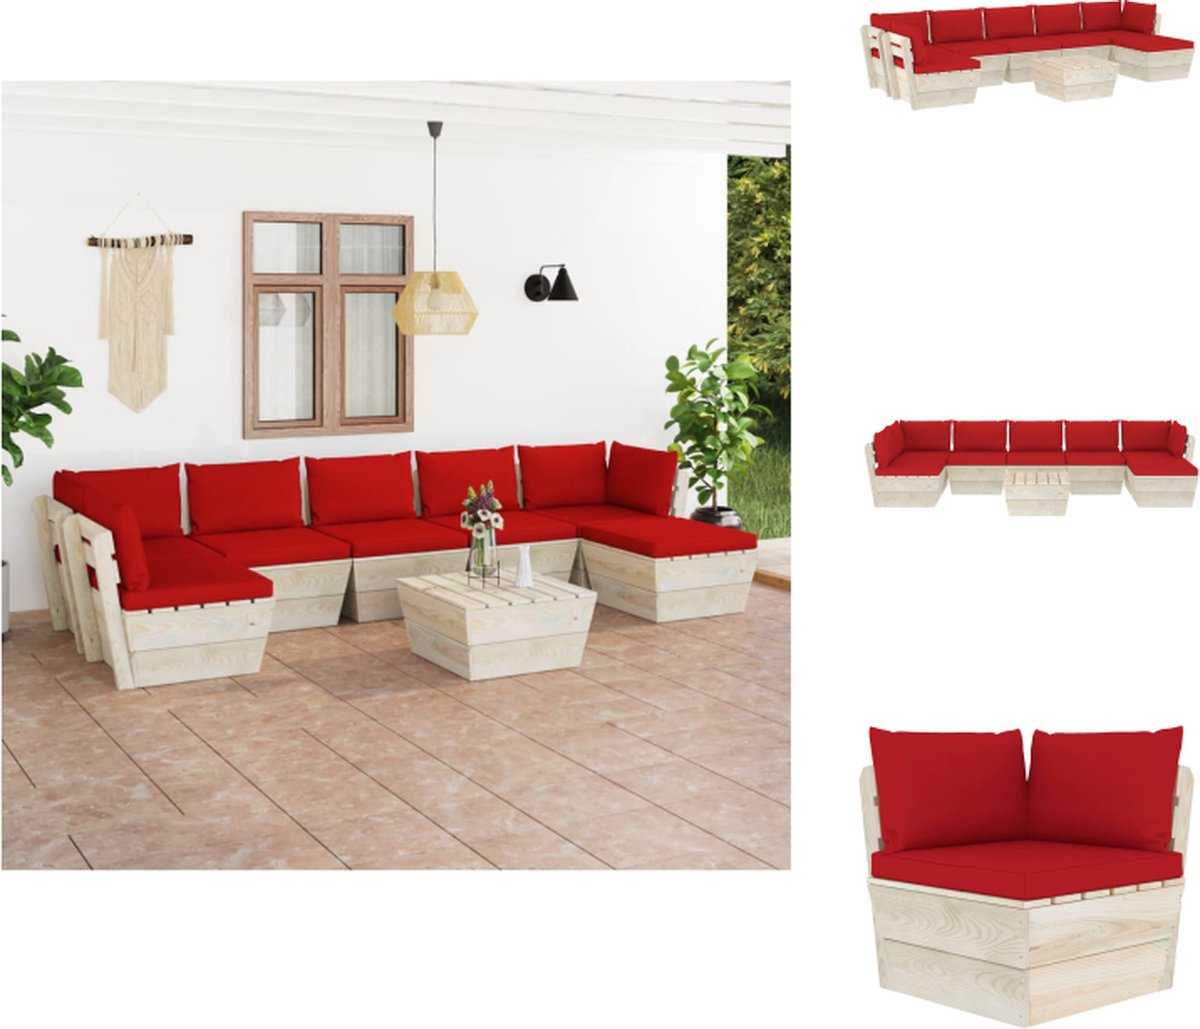 VidaXL Pallet Tuinset Hout 8-delig Rood 100% polyester Tuinset